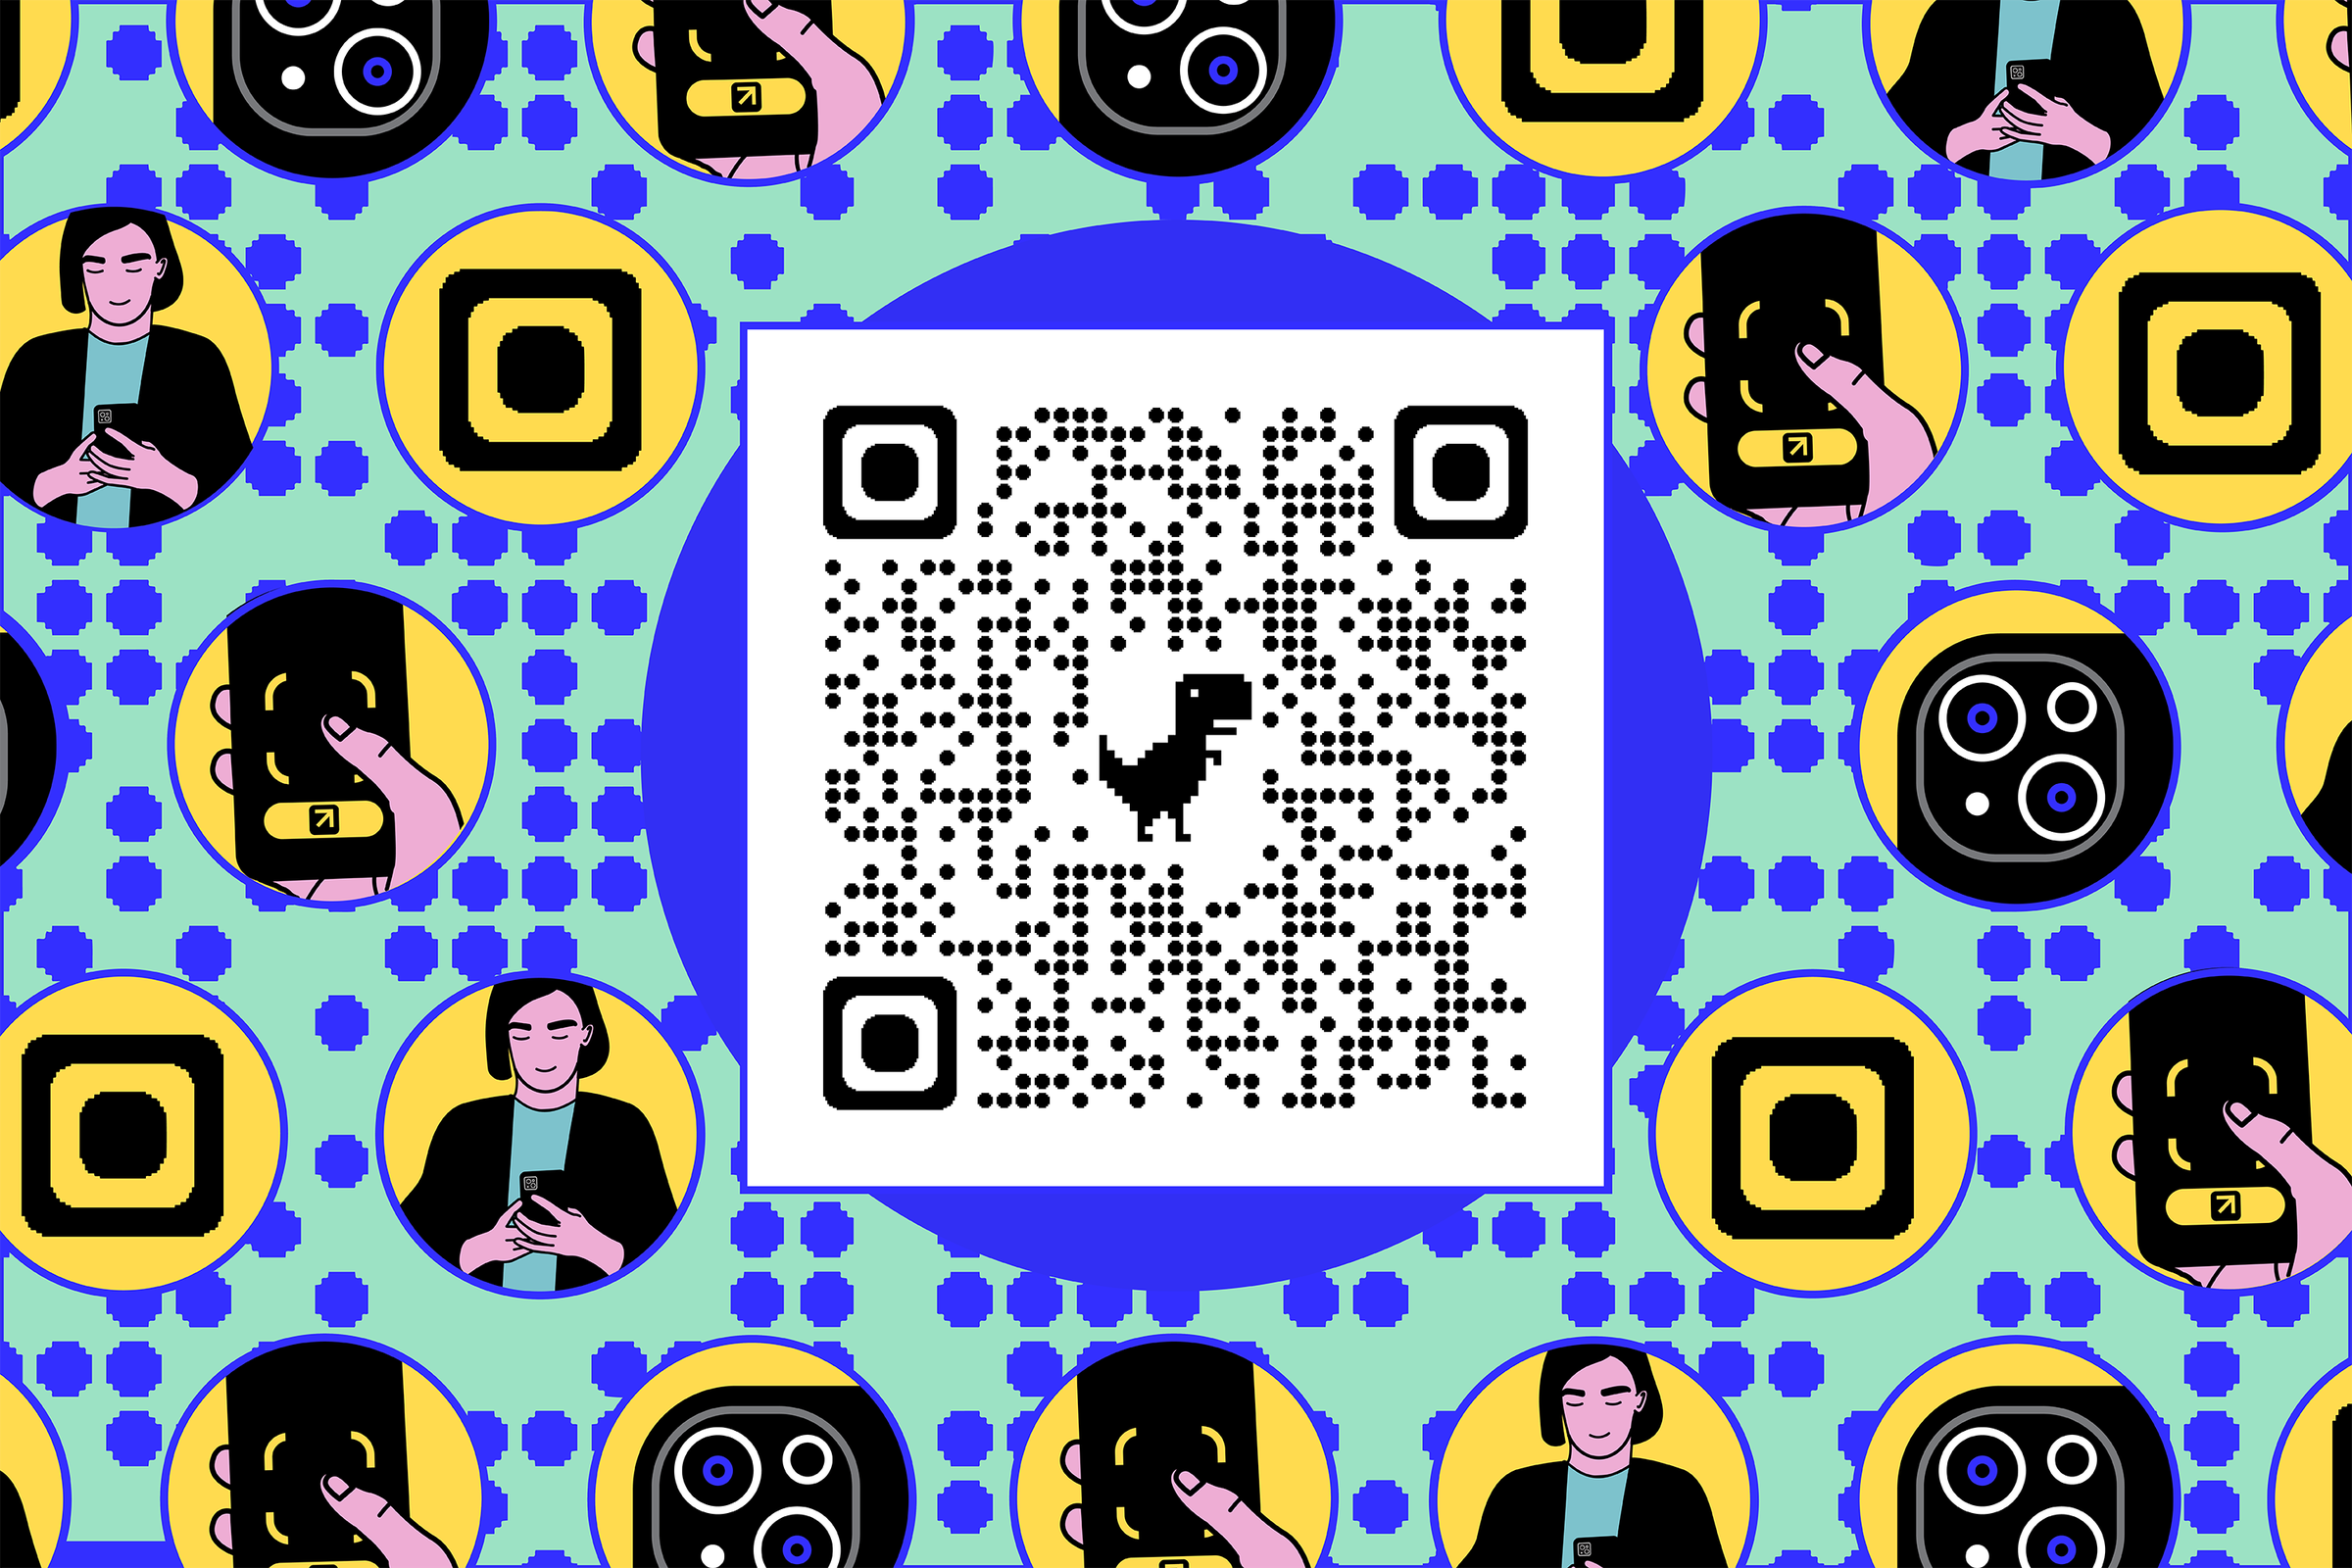 QR code against illustrated background